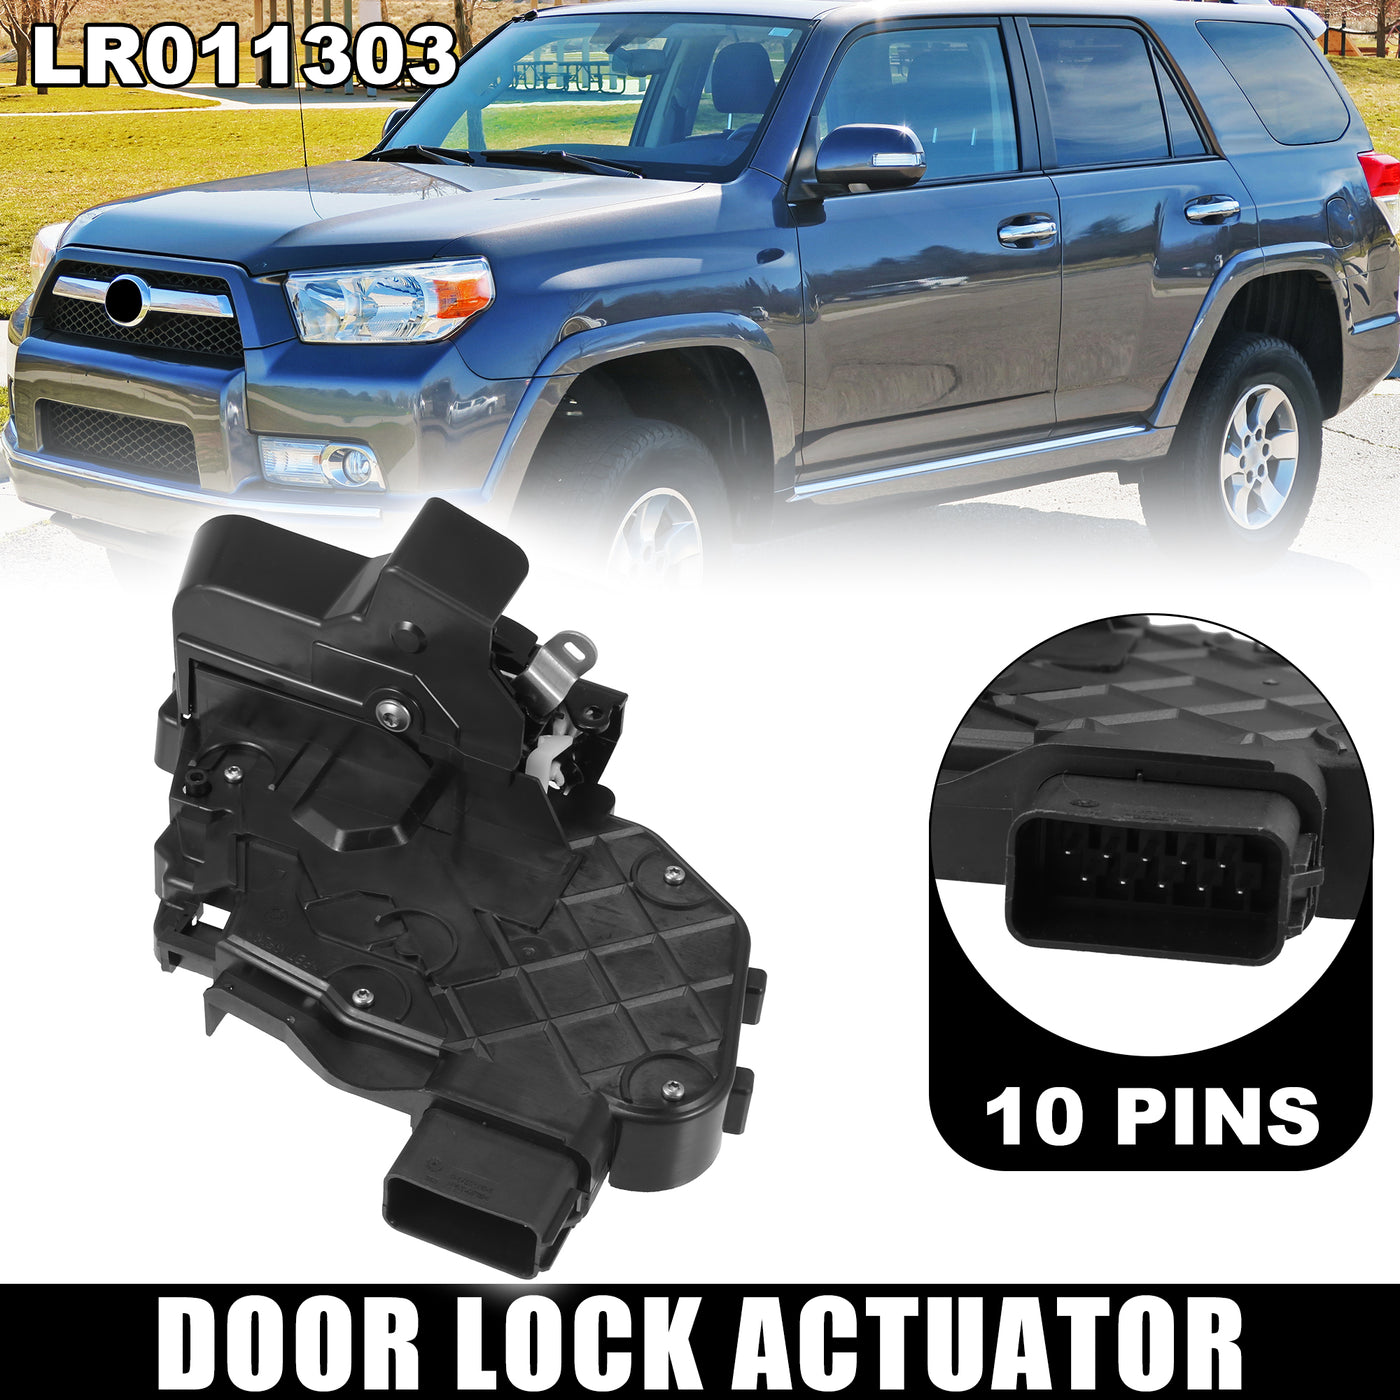 X AUTOHAUX Rear Left Door Lock Actuator Mechanism Central Locking for Land Rover Discovery 2004-2017 LR011303